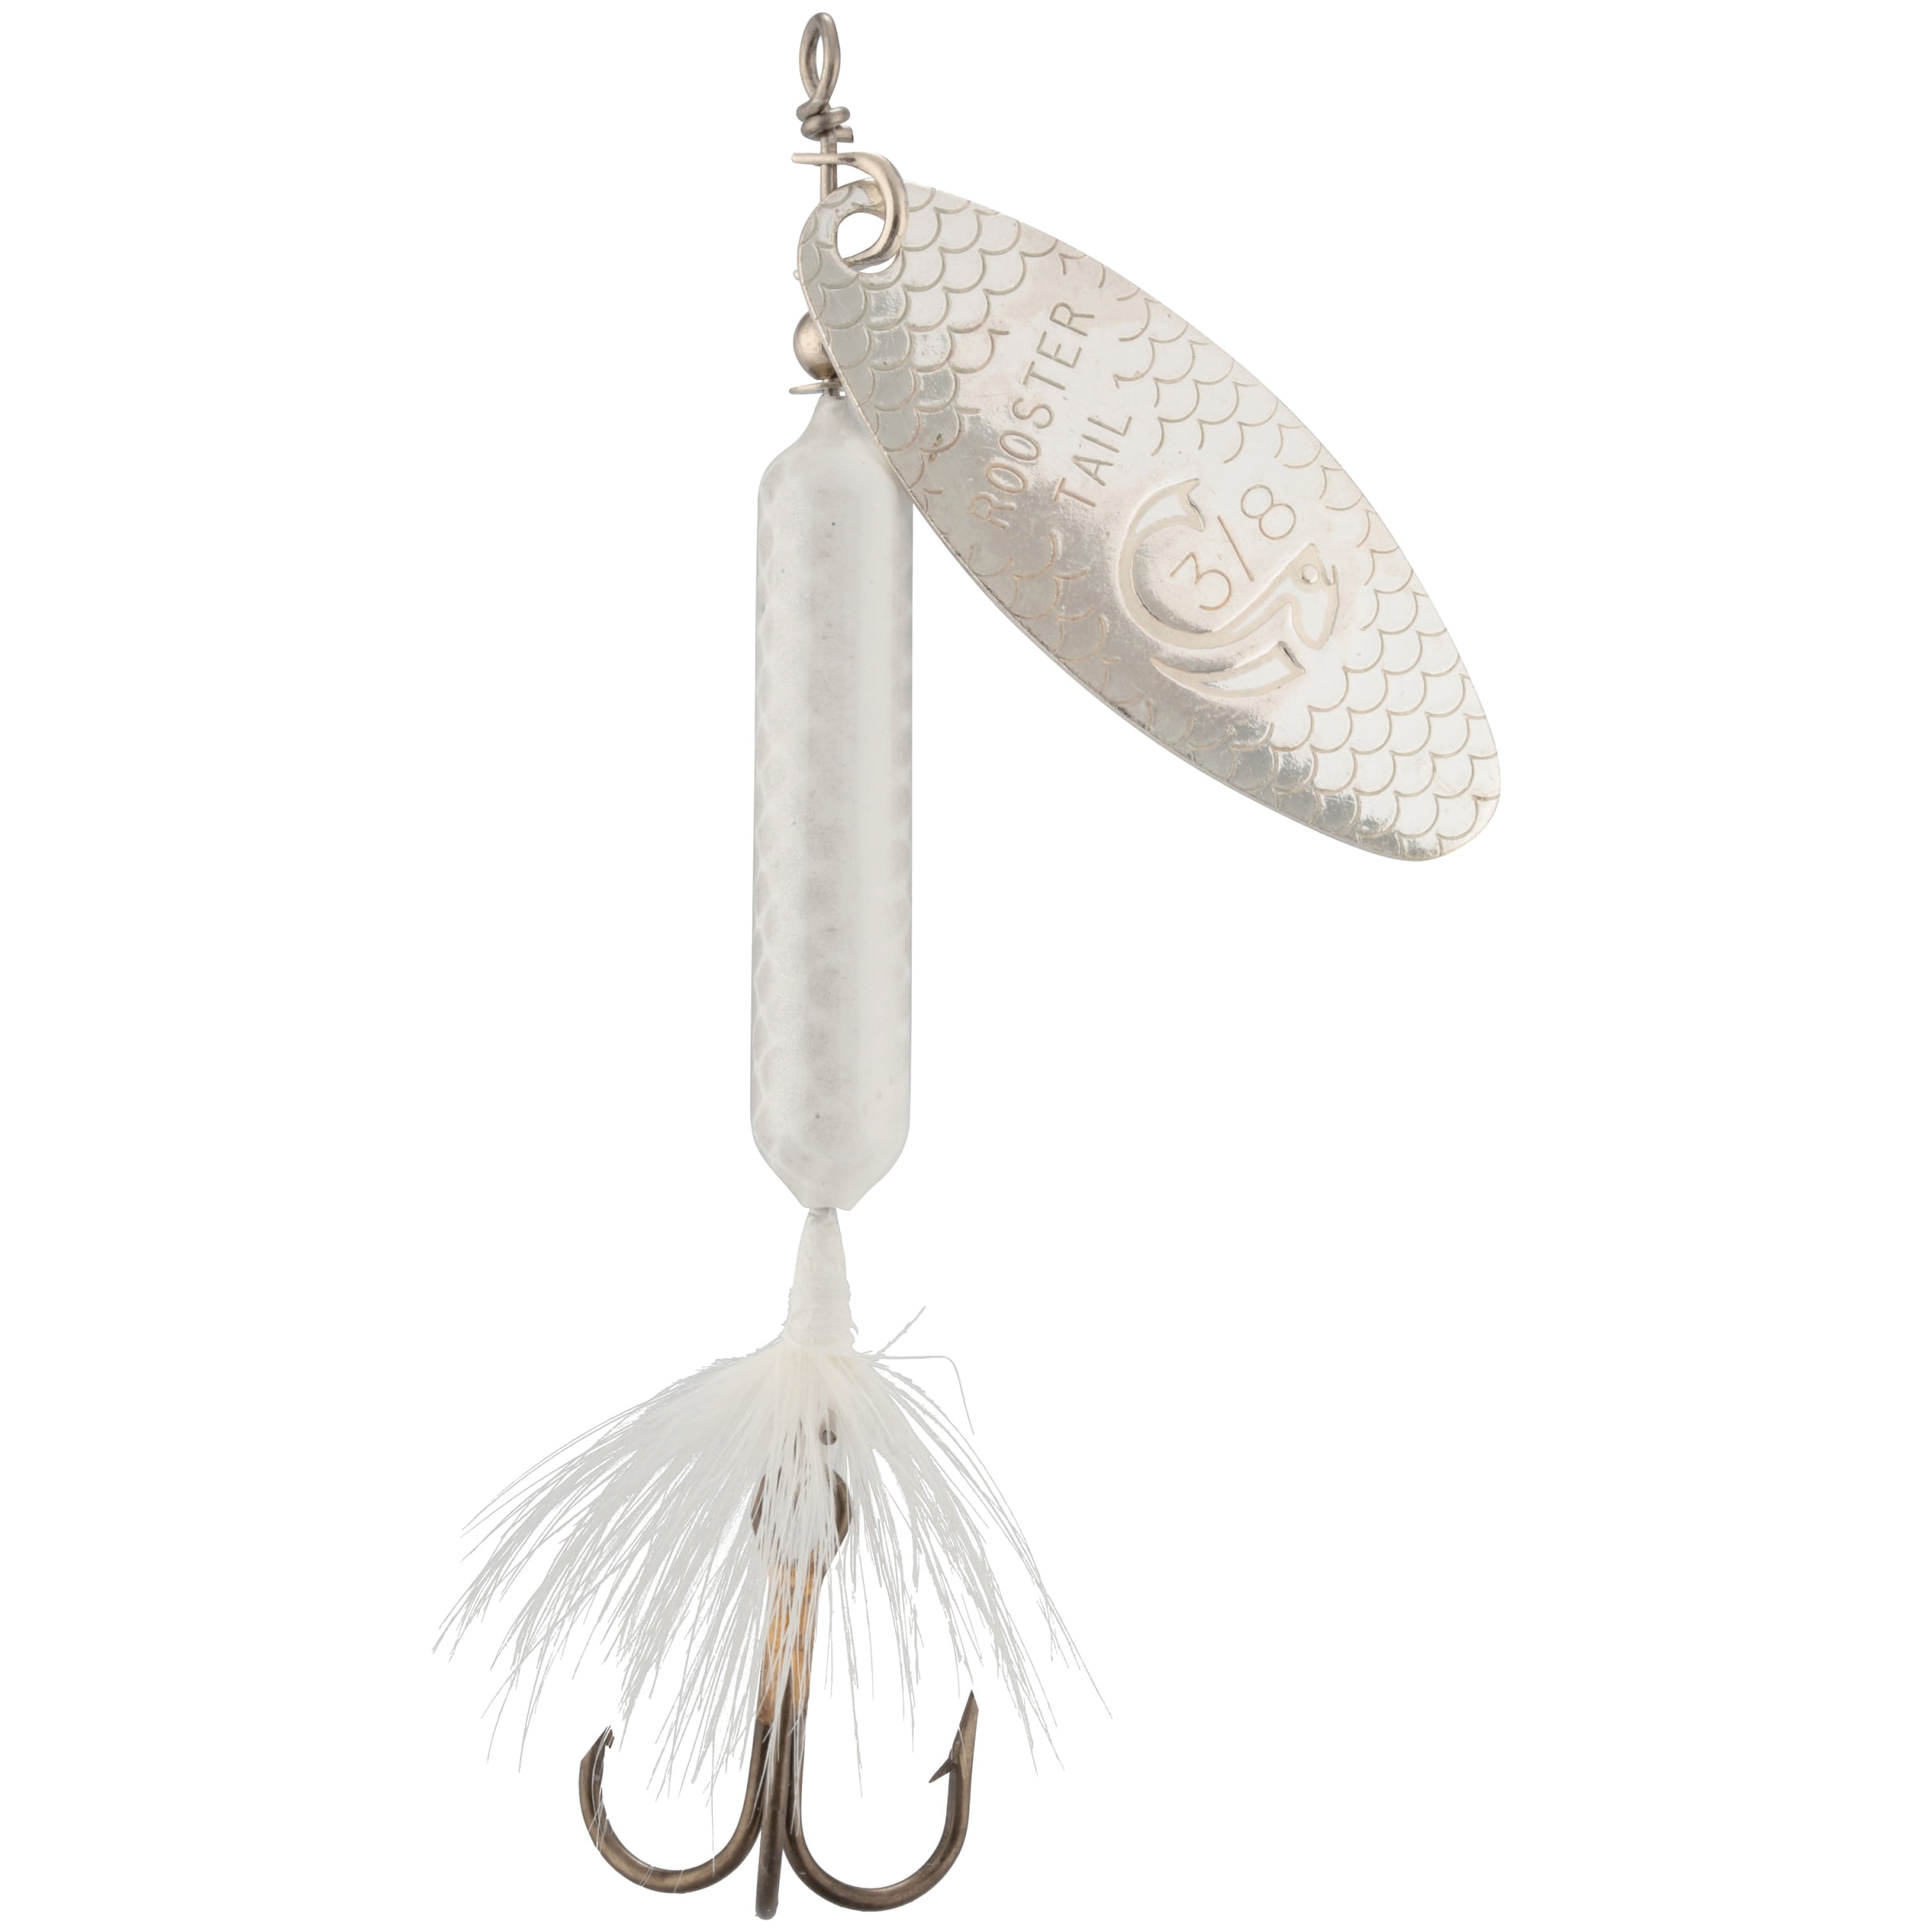 Worden's® Original White Rooster Tail®, Inline Spinnerbait Fishing